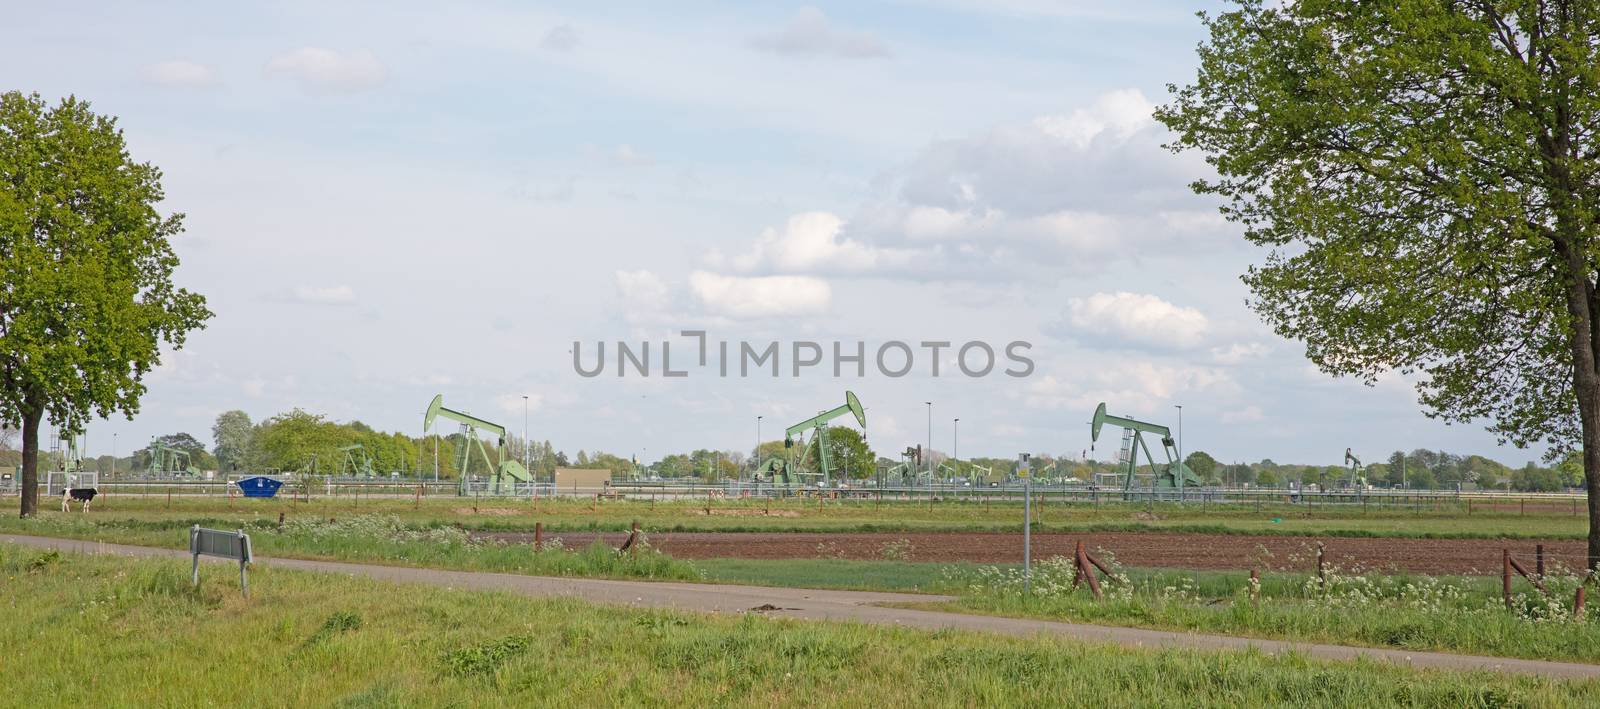 Landscape with oil pump jack by michaklootwijk